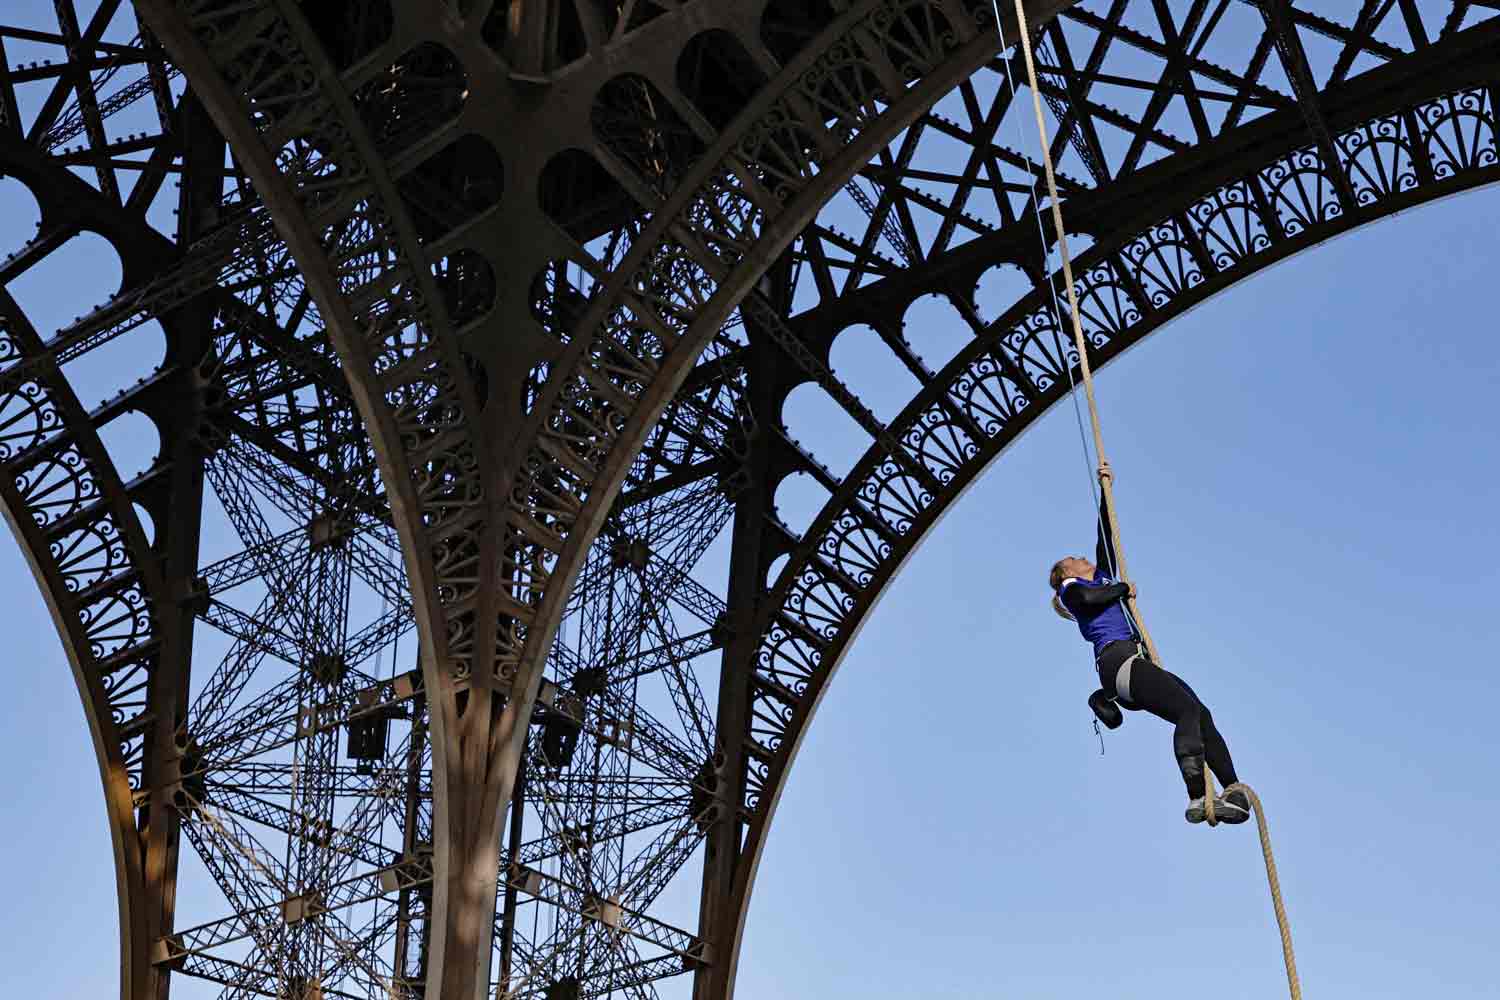 A woman climbs a rope that is hanging from the Eiffel Tower.